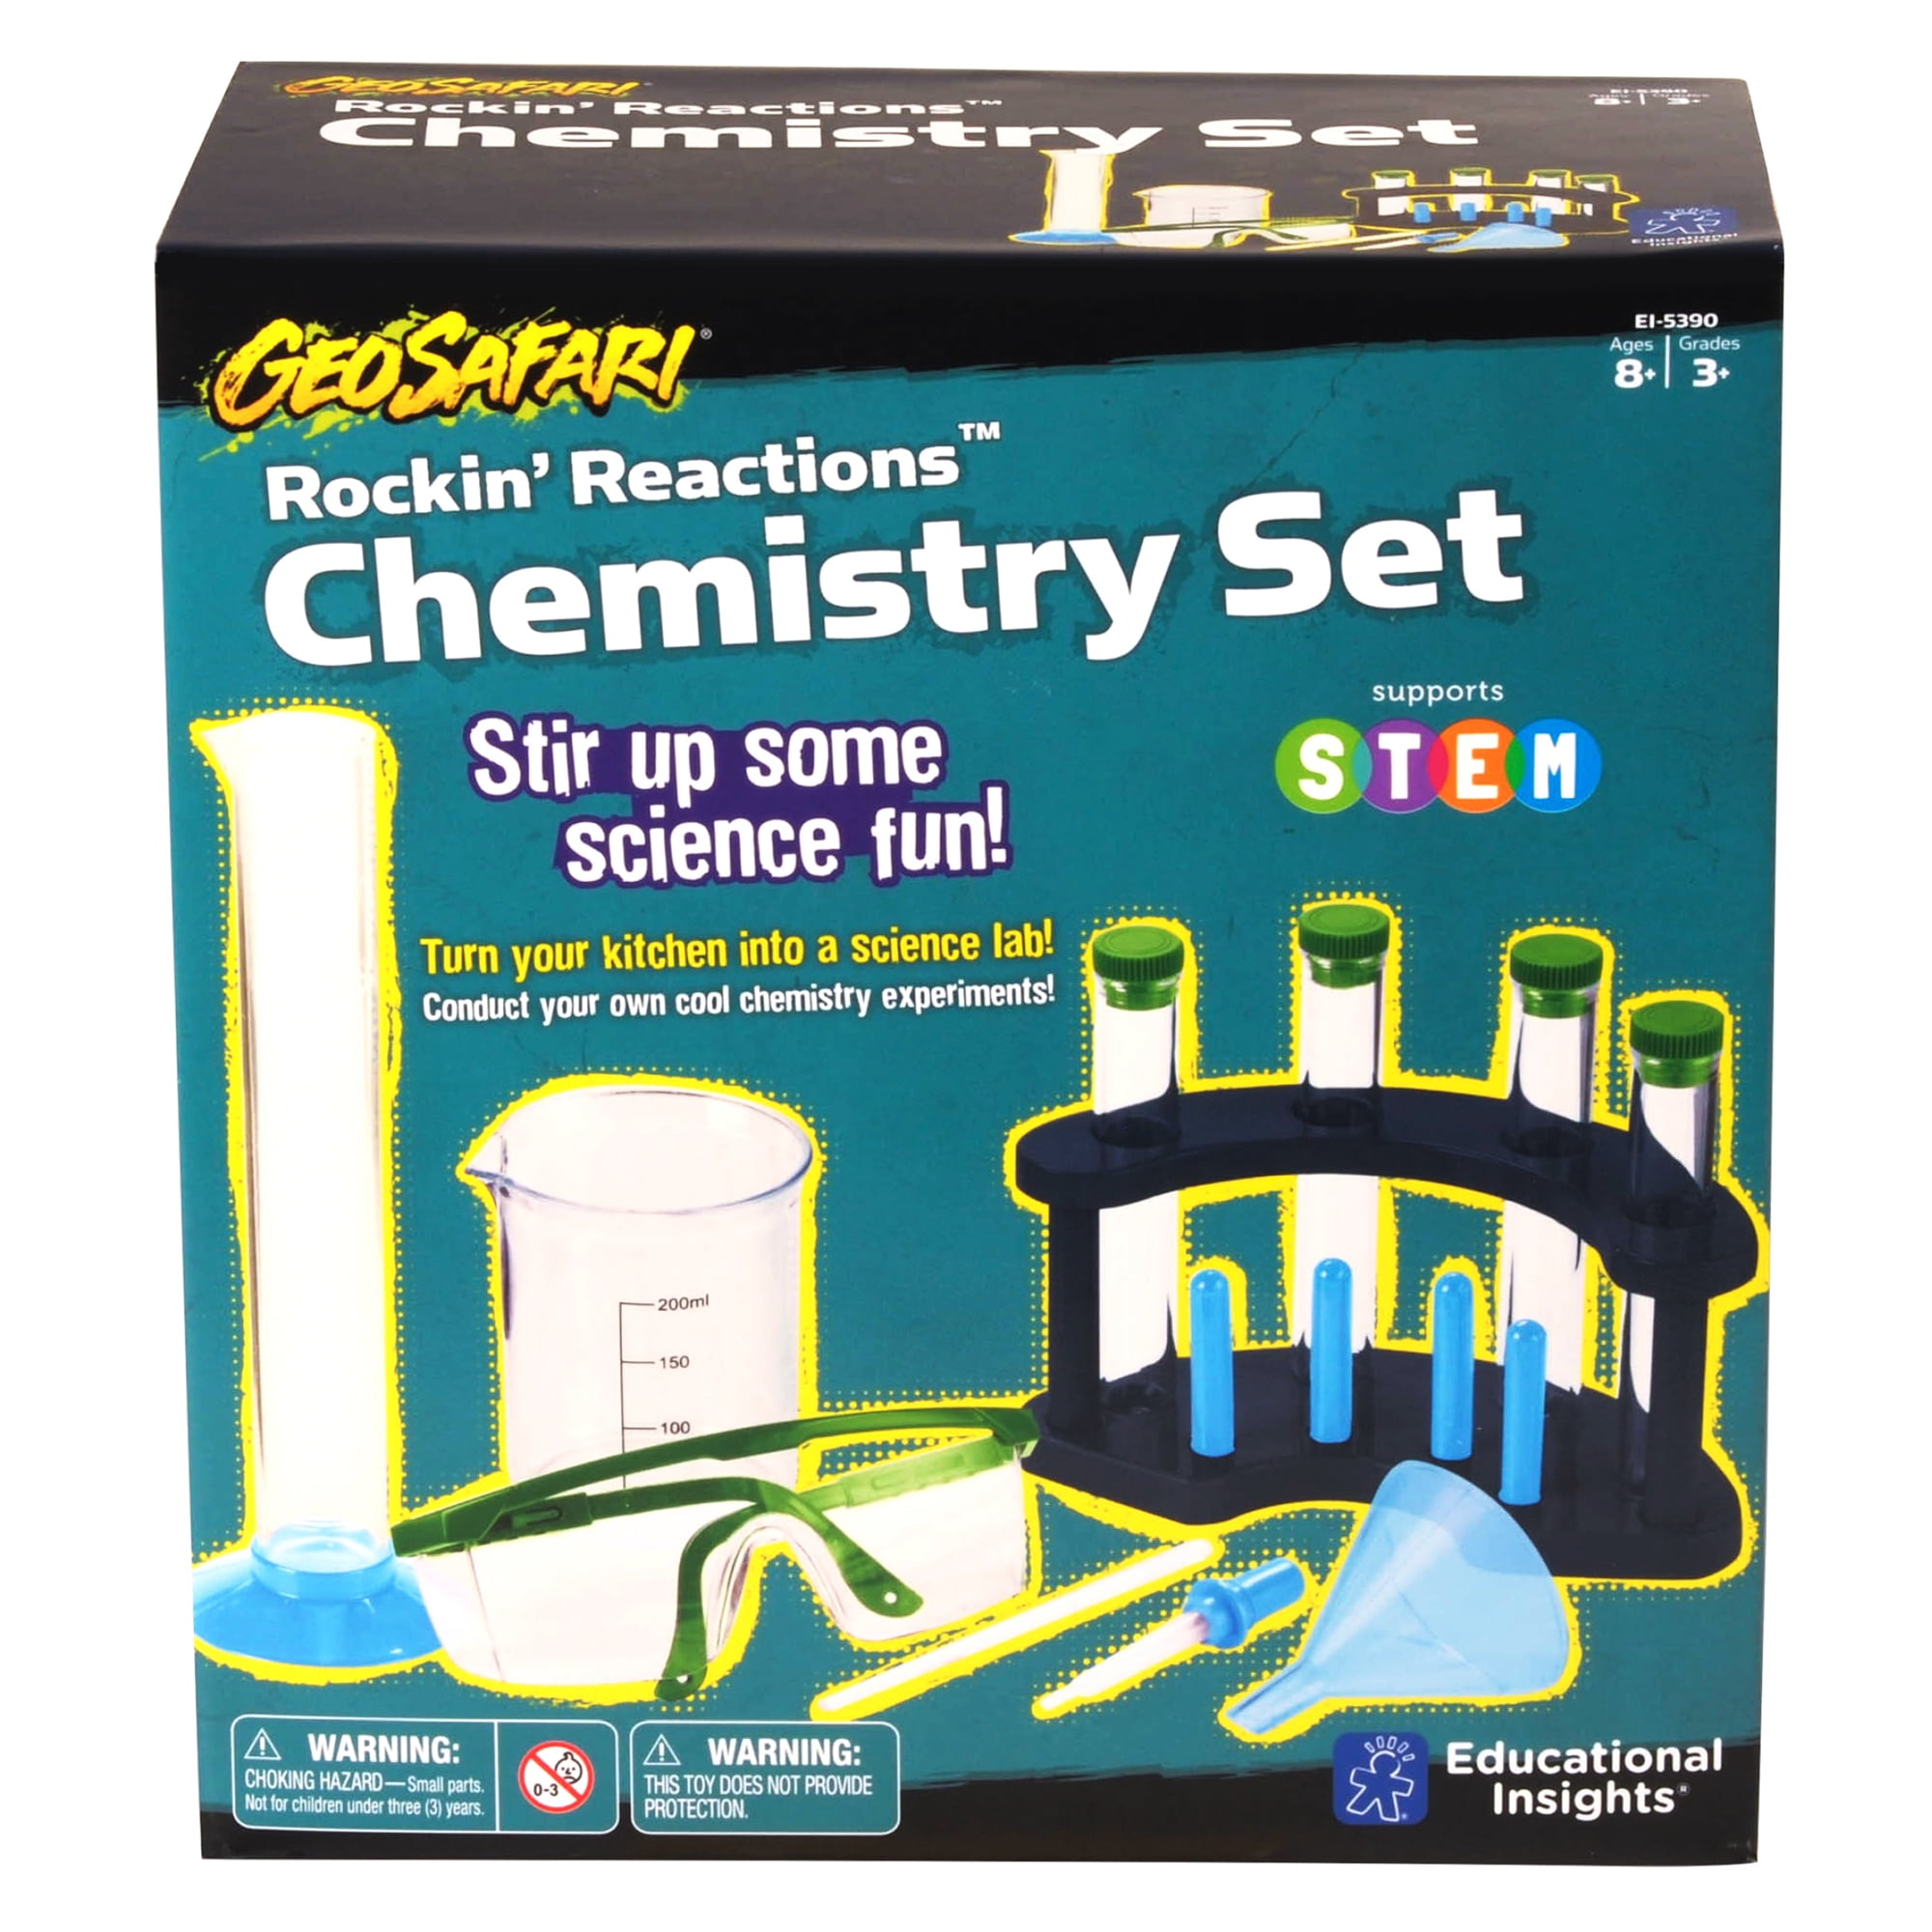  National Geographic JM80599U Set Educational Science Age 8+  with 20 Easy Experiments  Fascinating Kids STEM Toys Gifts for 8+ Year Old  Boys and Girls, Amazing Reactions Chemistry Kit : Toys & Games